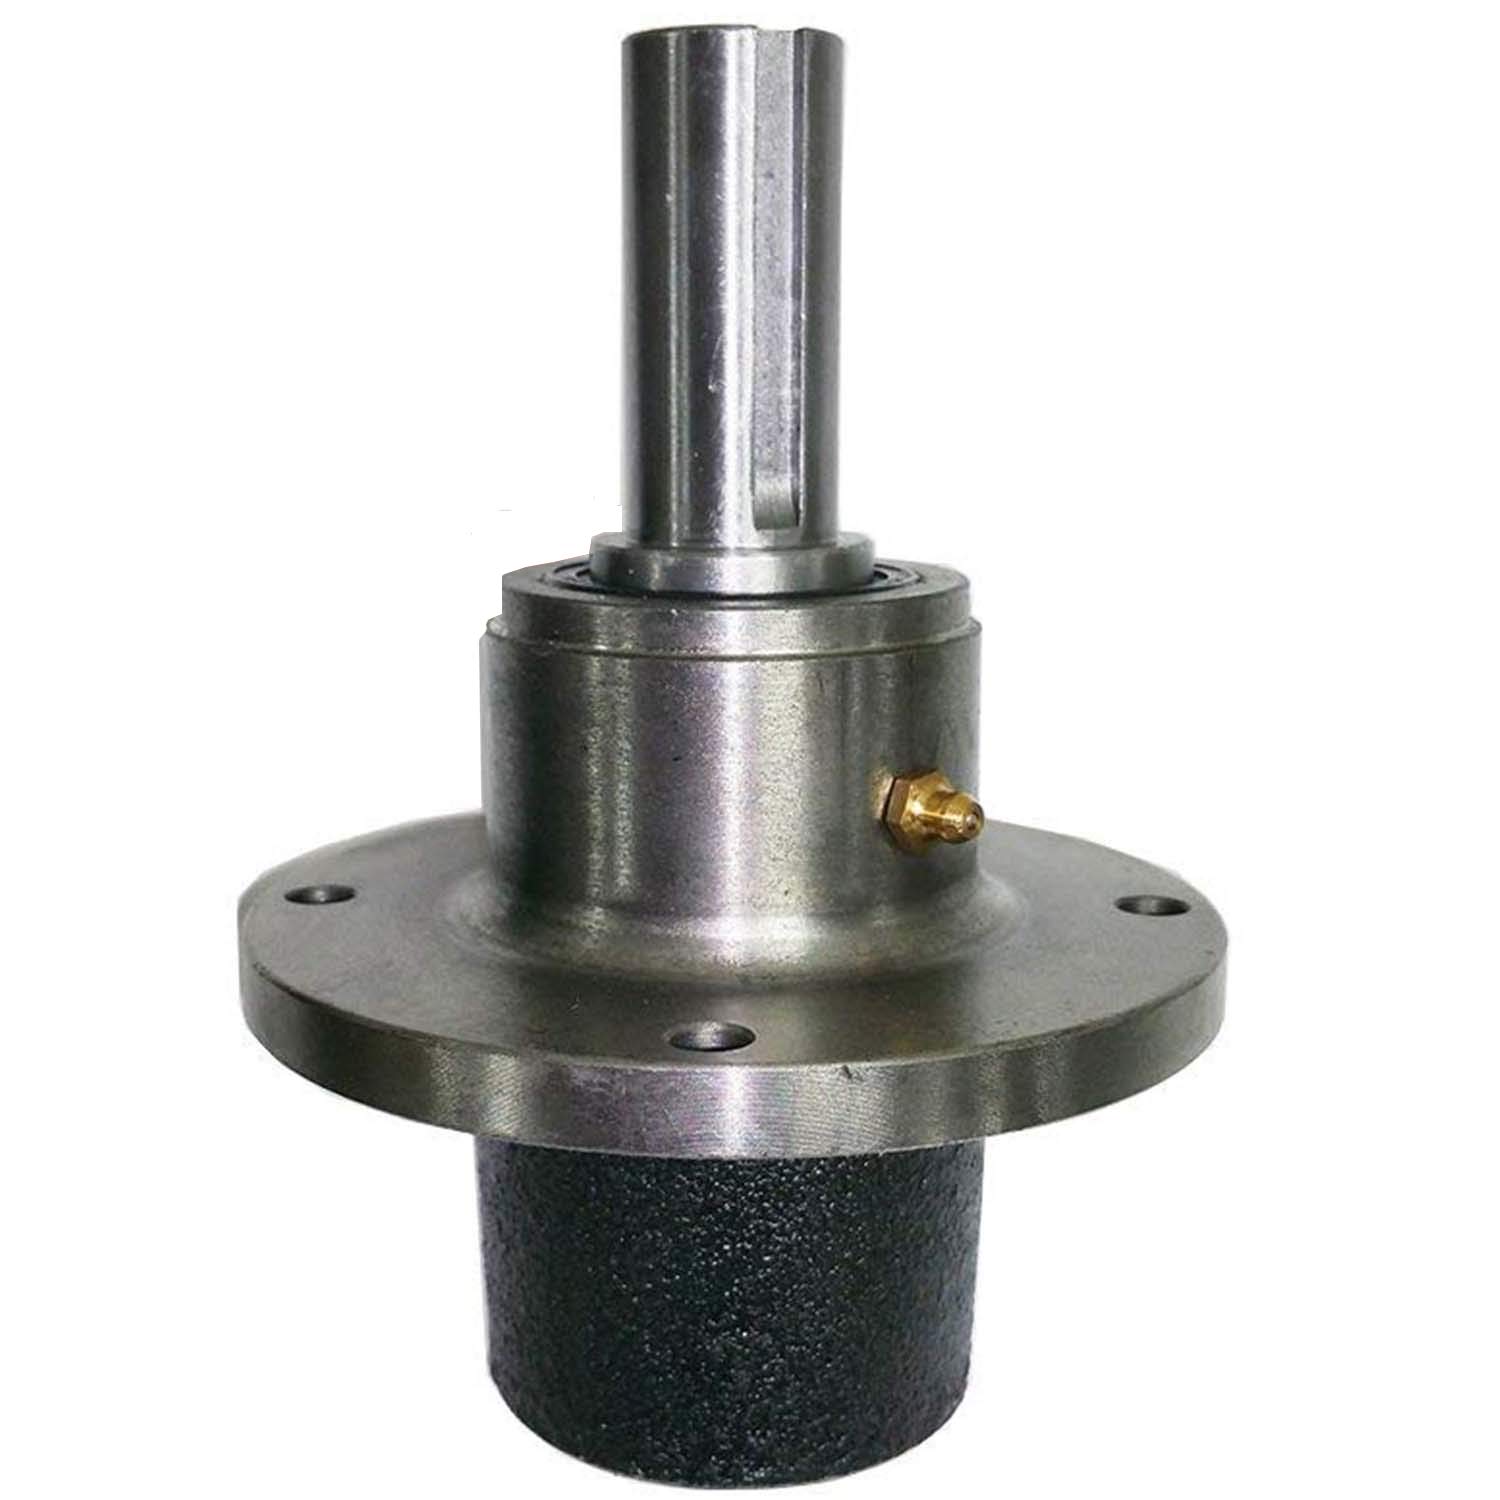 mower deck spindle for Scag 41001, 41007, 41008, 46020, 461663, 46400, 46631